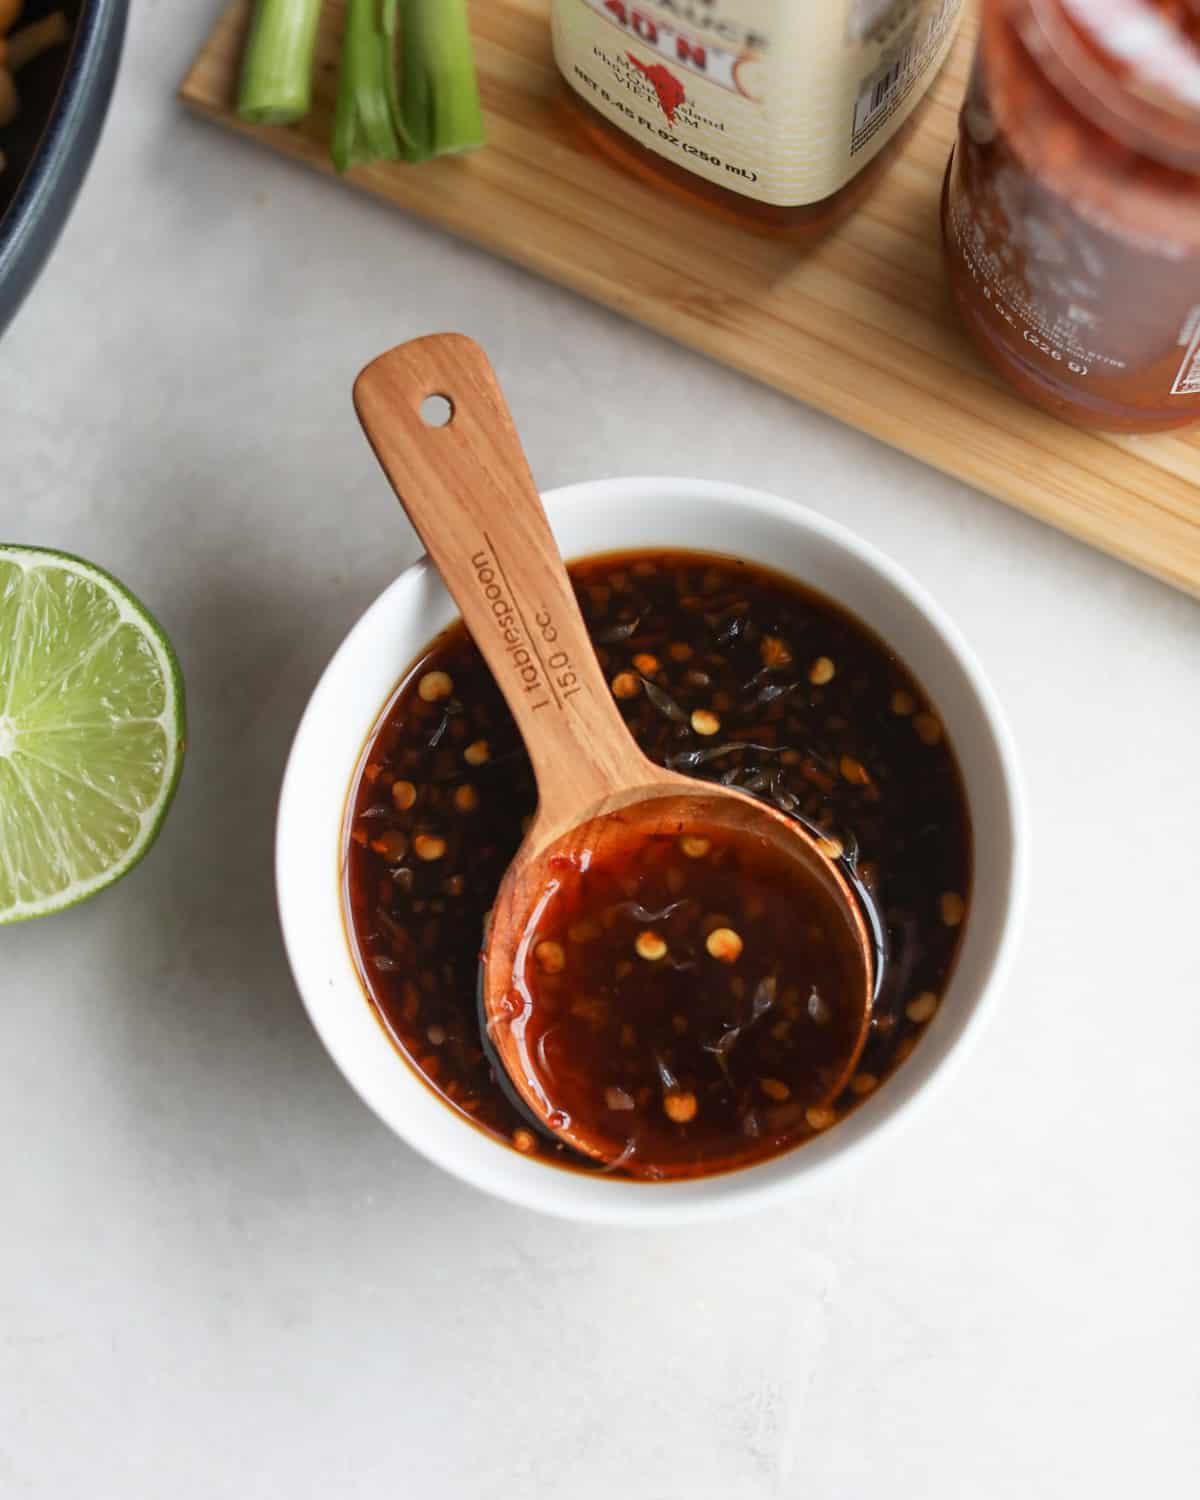 sauce in a small white bowl with a 1 tablespoon wooden measuring spoon